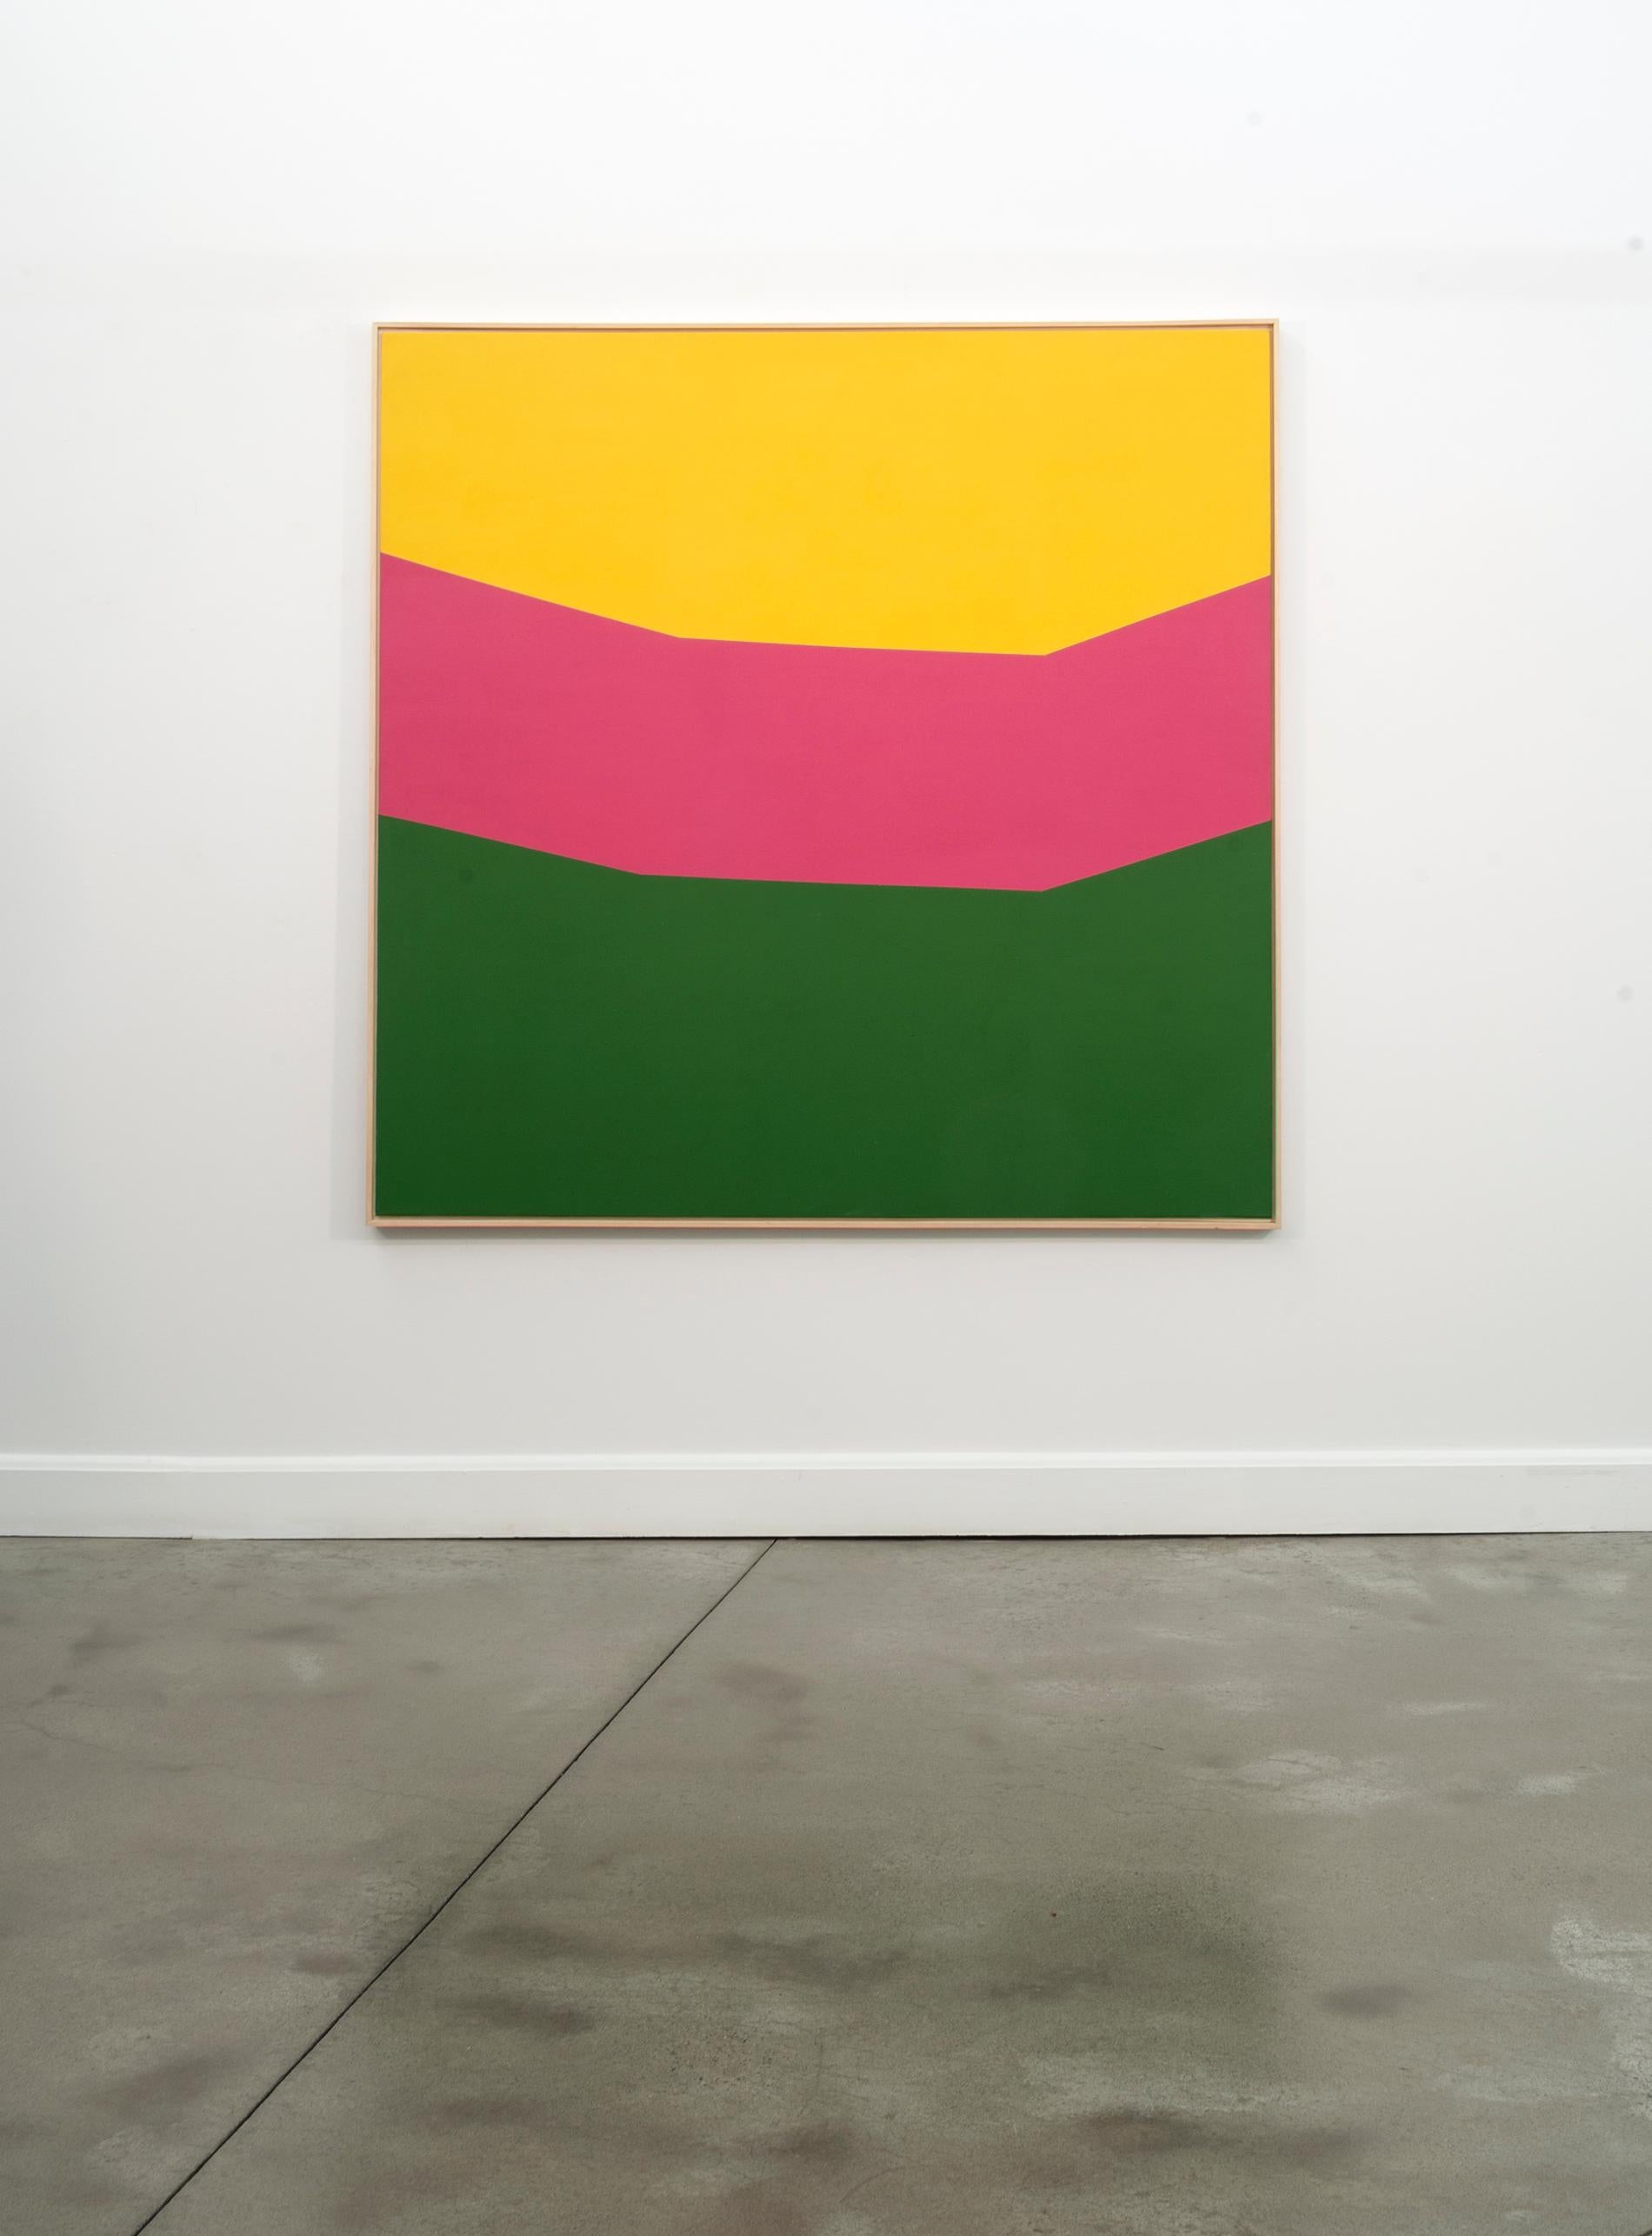 The power of pure colour and minimal form on raw canvas. This is Milly Ristvedt.
Three rows of gently curved horizontal bands of colour—golden yellow, hot pink and green create a striking composition. A master colourist, Ristvedt’s career as a